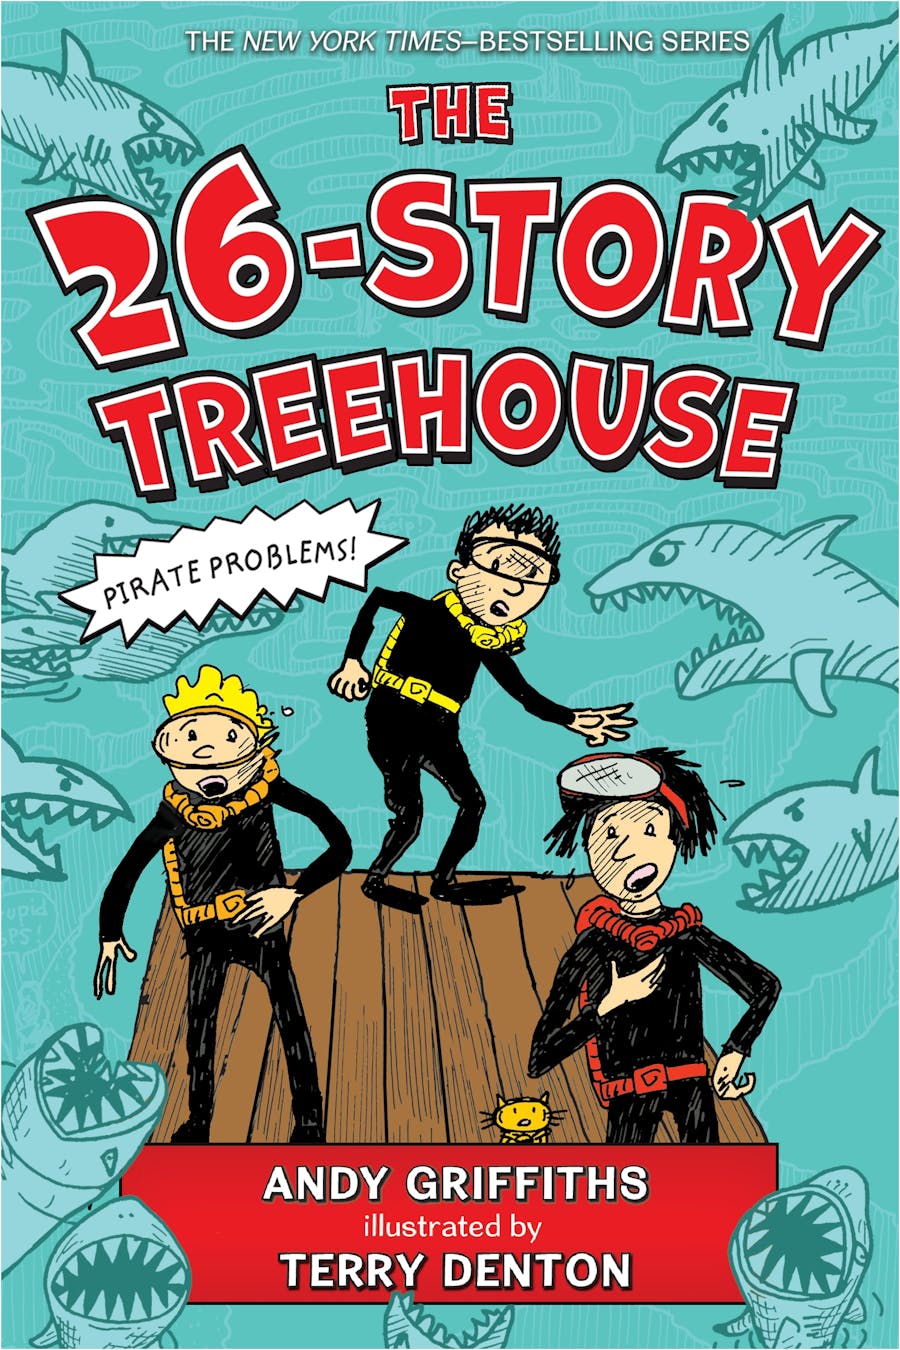 ECB: Treehouse #2: The 26-Story Treehouse - Ages 6+